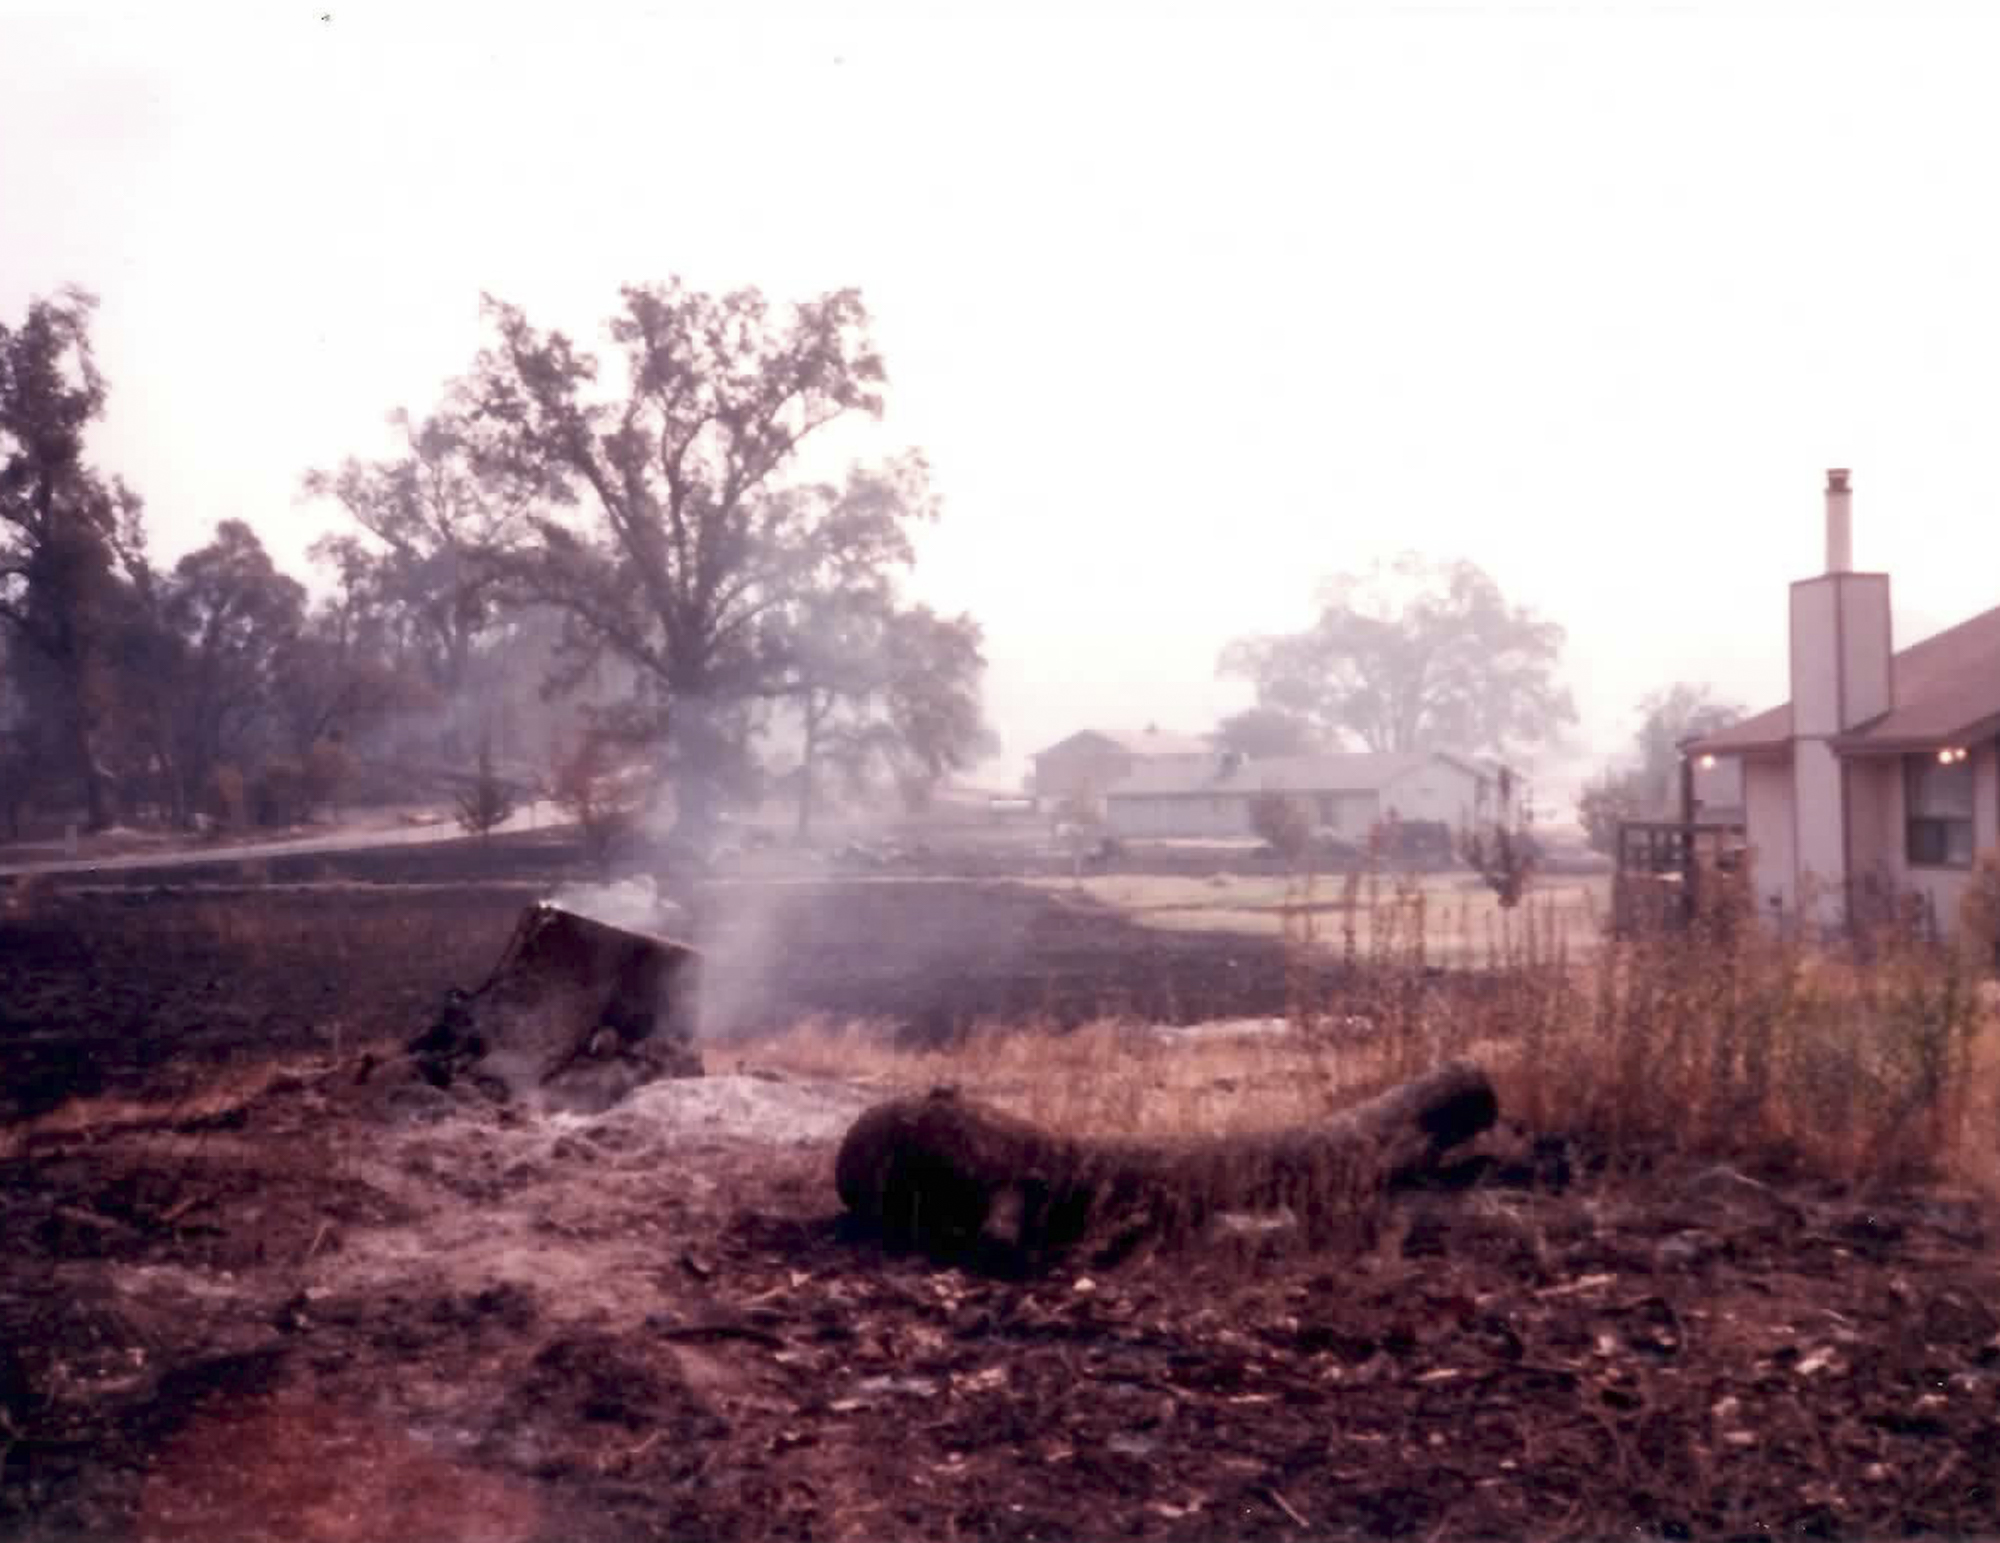 Several houses beside fire-scorched terrain.